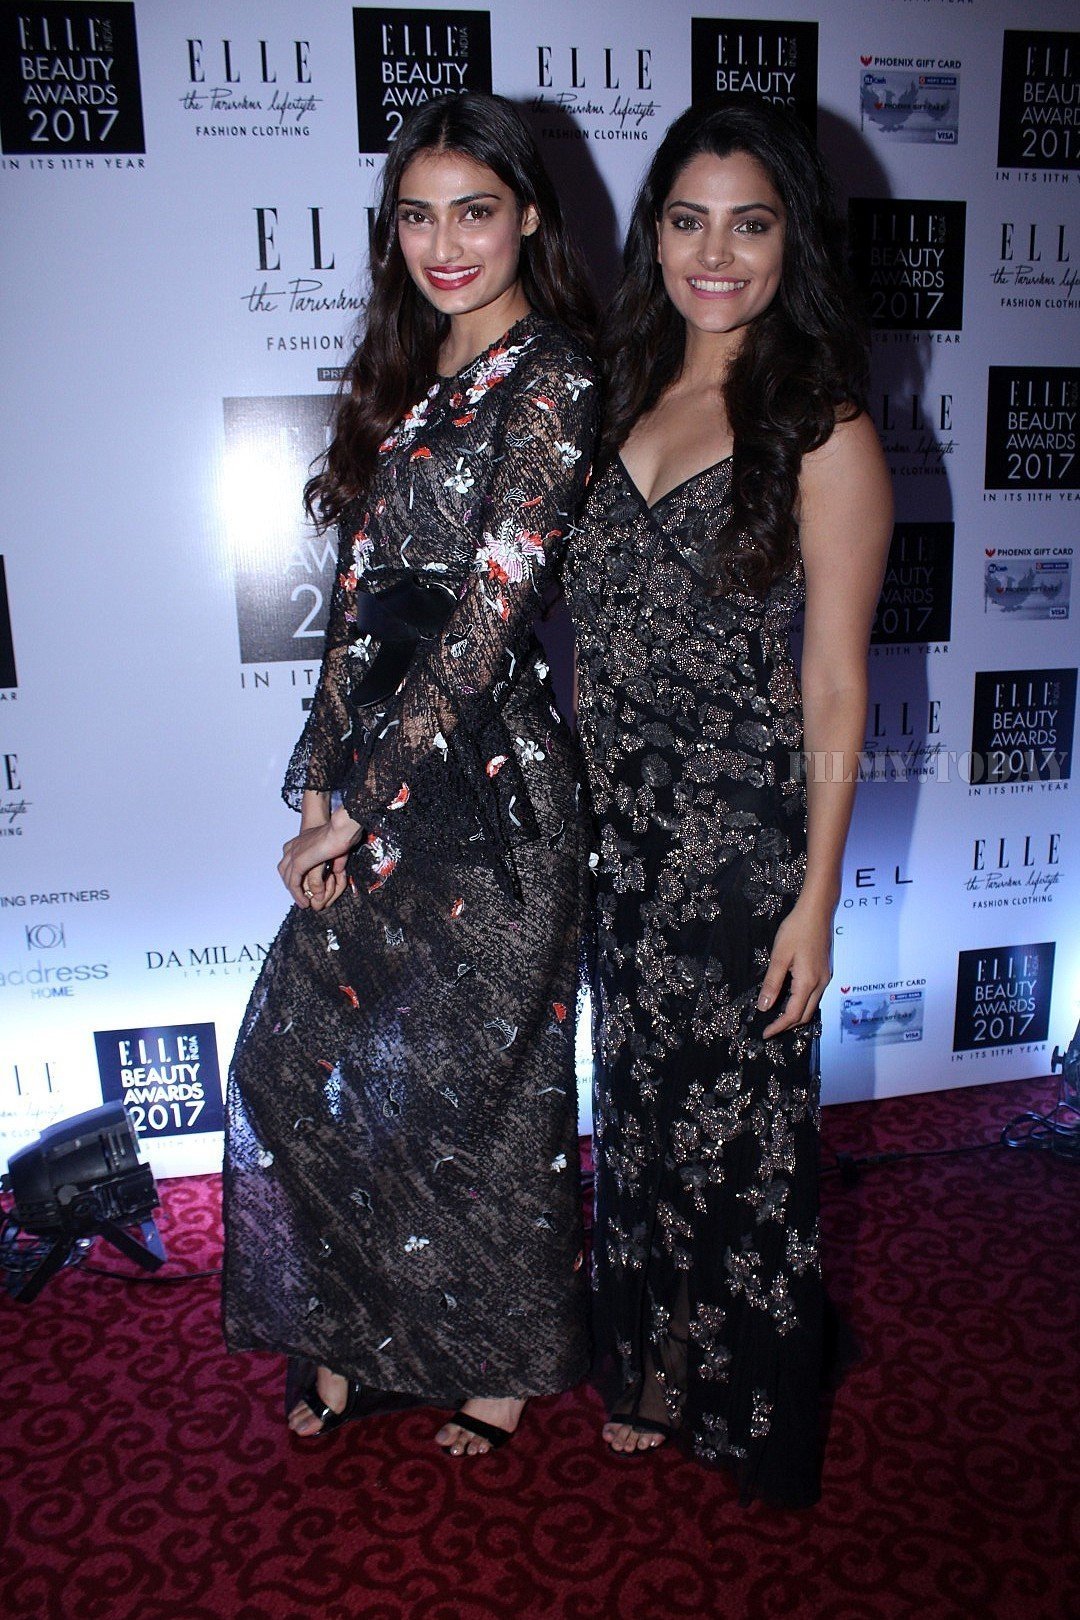 In Pics: Elle India Beauty Awards 2017 | Picture 1533430